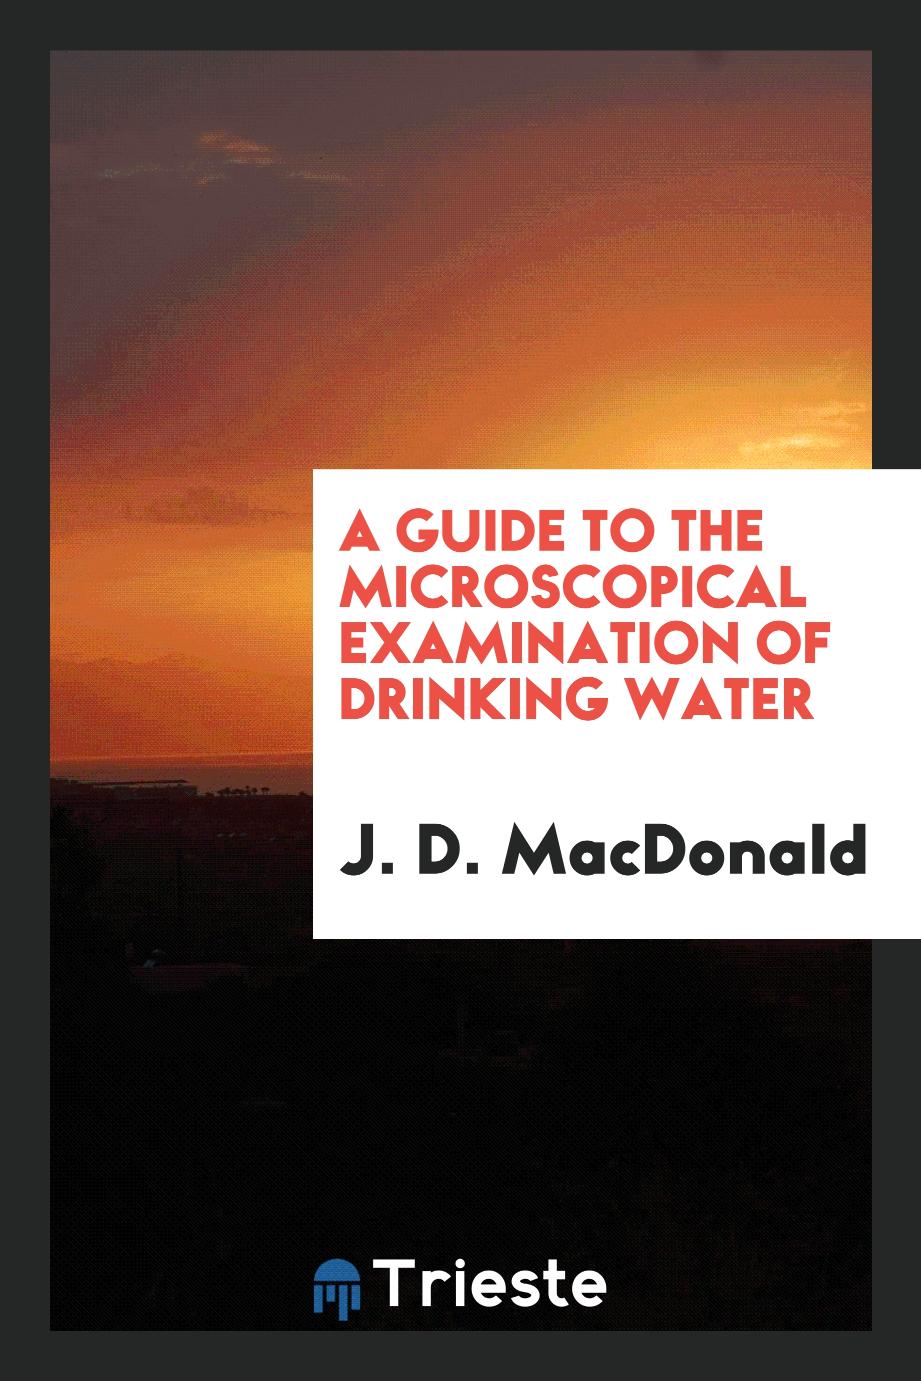 A Guide to the Microscopical Examination of Drinking Water